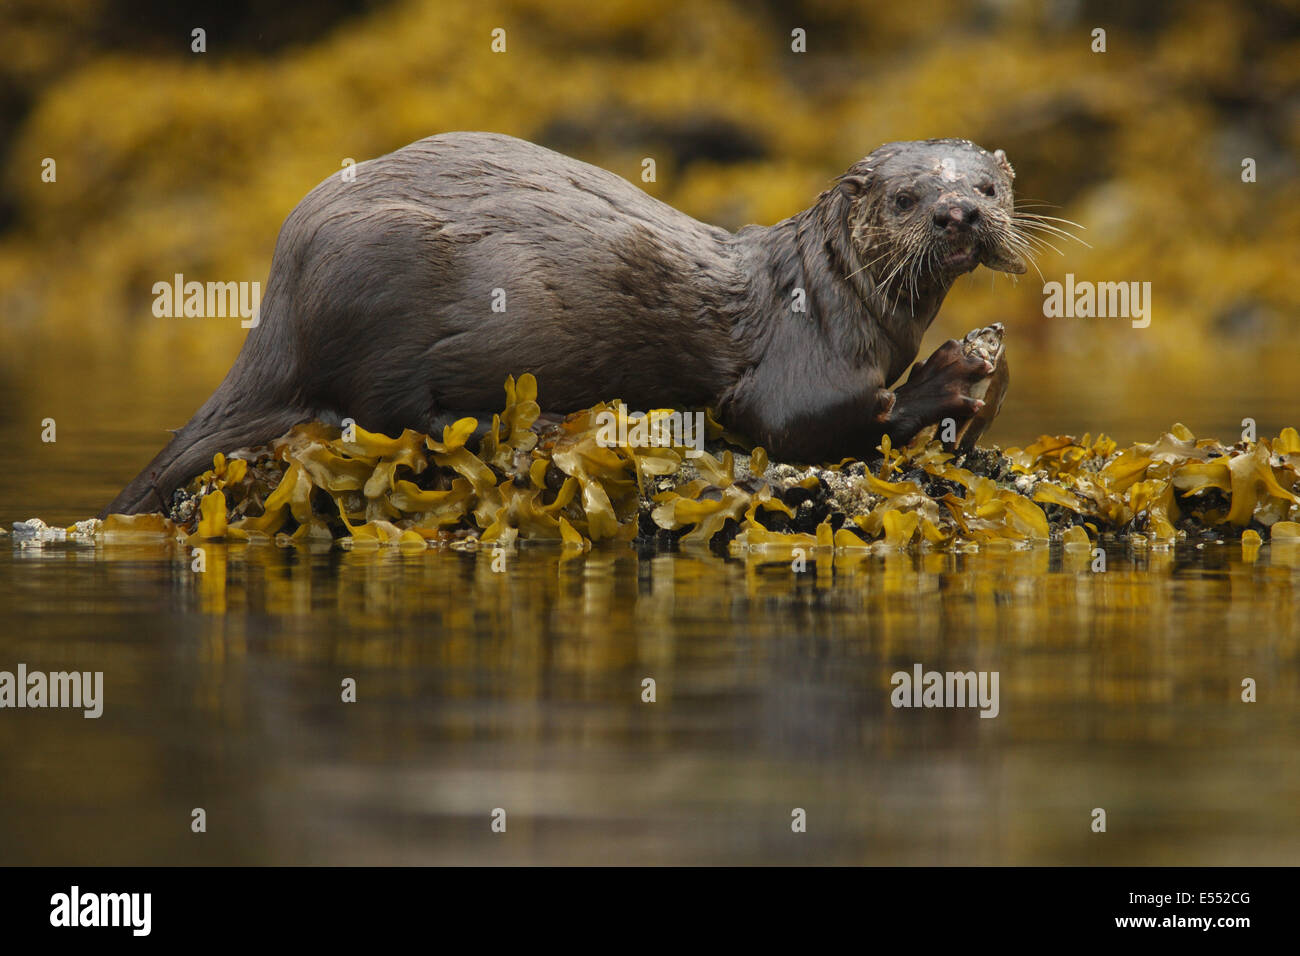 North American River Otter (Lontra canadensis) adult, with scarred head and nose, feeding on crab in inlet of temperate coastal Stock Photo